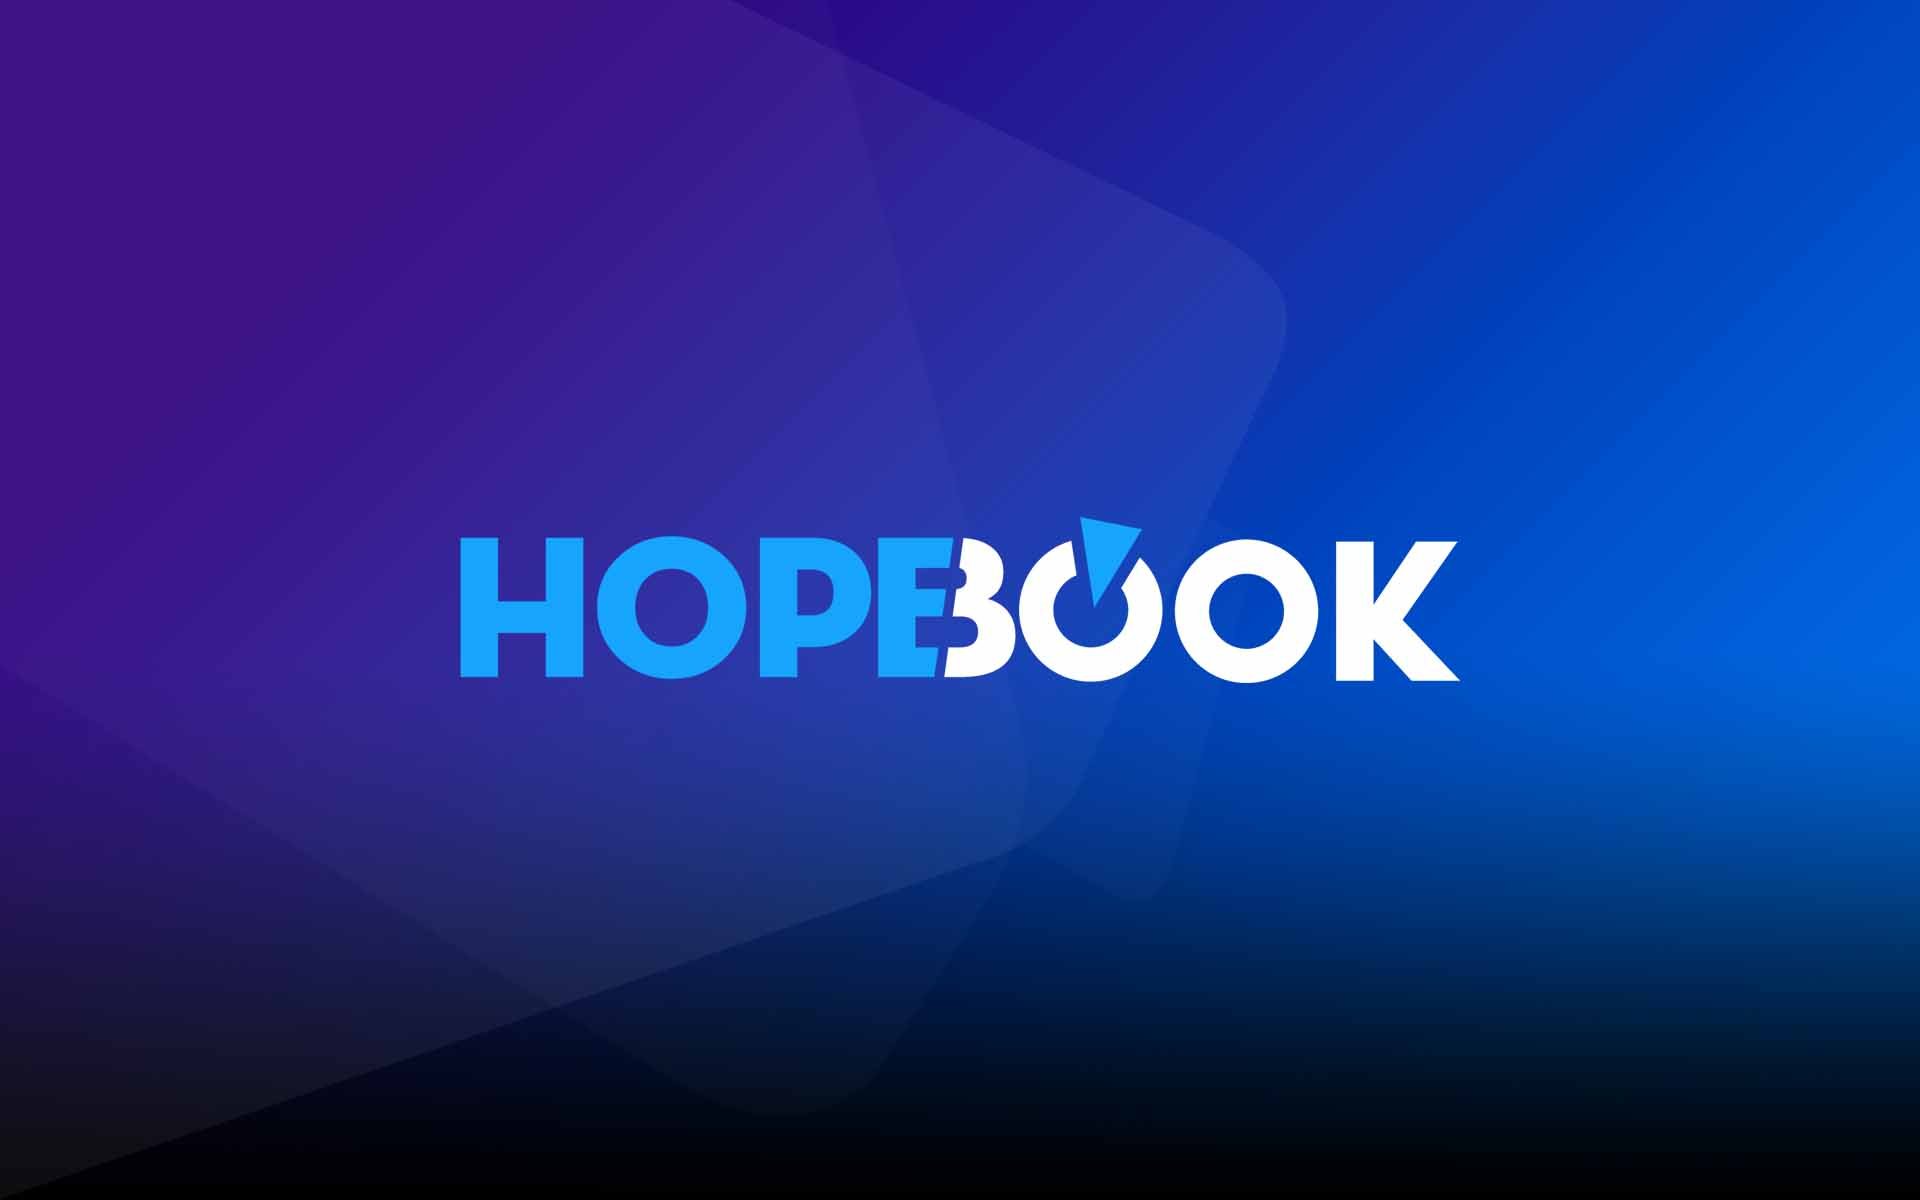 HOPEBOOK Readies For Launch Event – Will Forever Change The Way People Around The World Approach Banking & Finance – The World’s Most Transparent Financial Rotation System